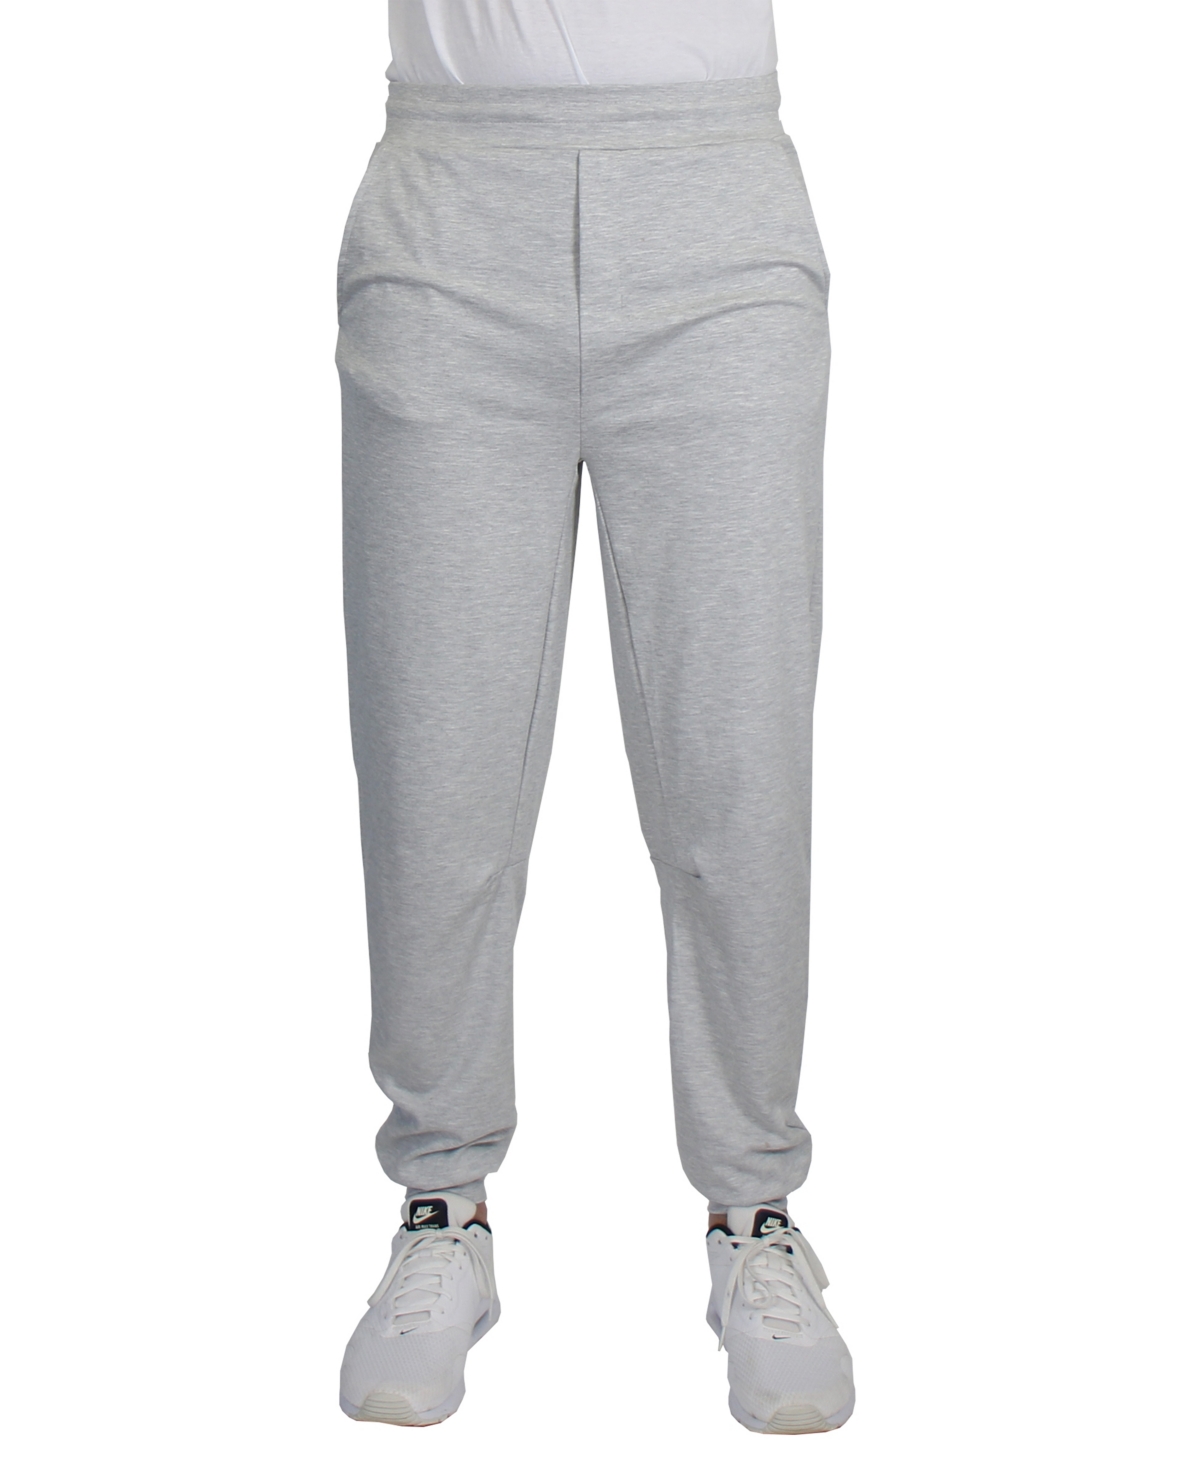 Blue Ice Men's Moisture Wicking Performance Classic Jogger Sweatpants In Heather Gray